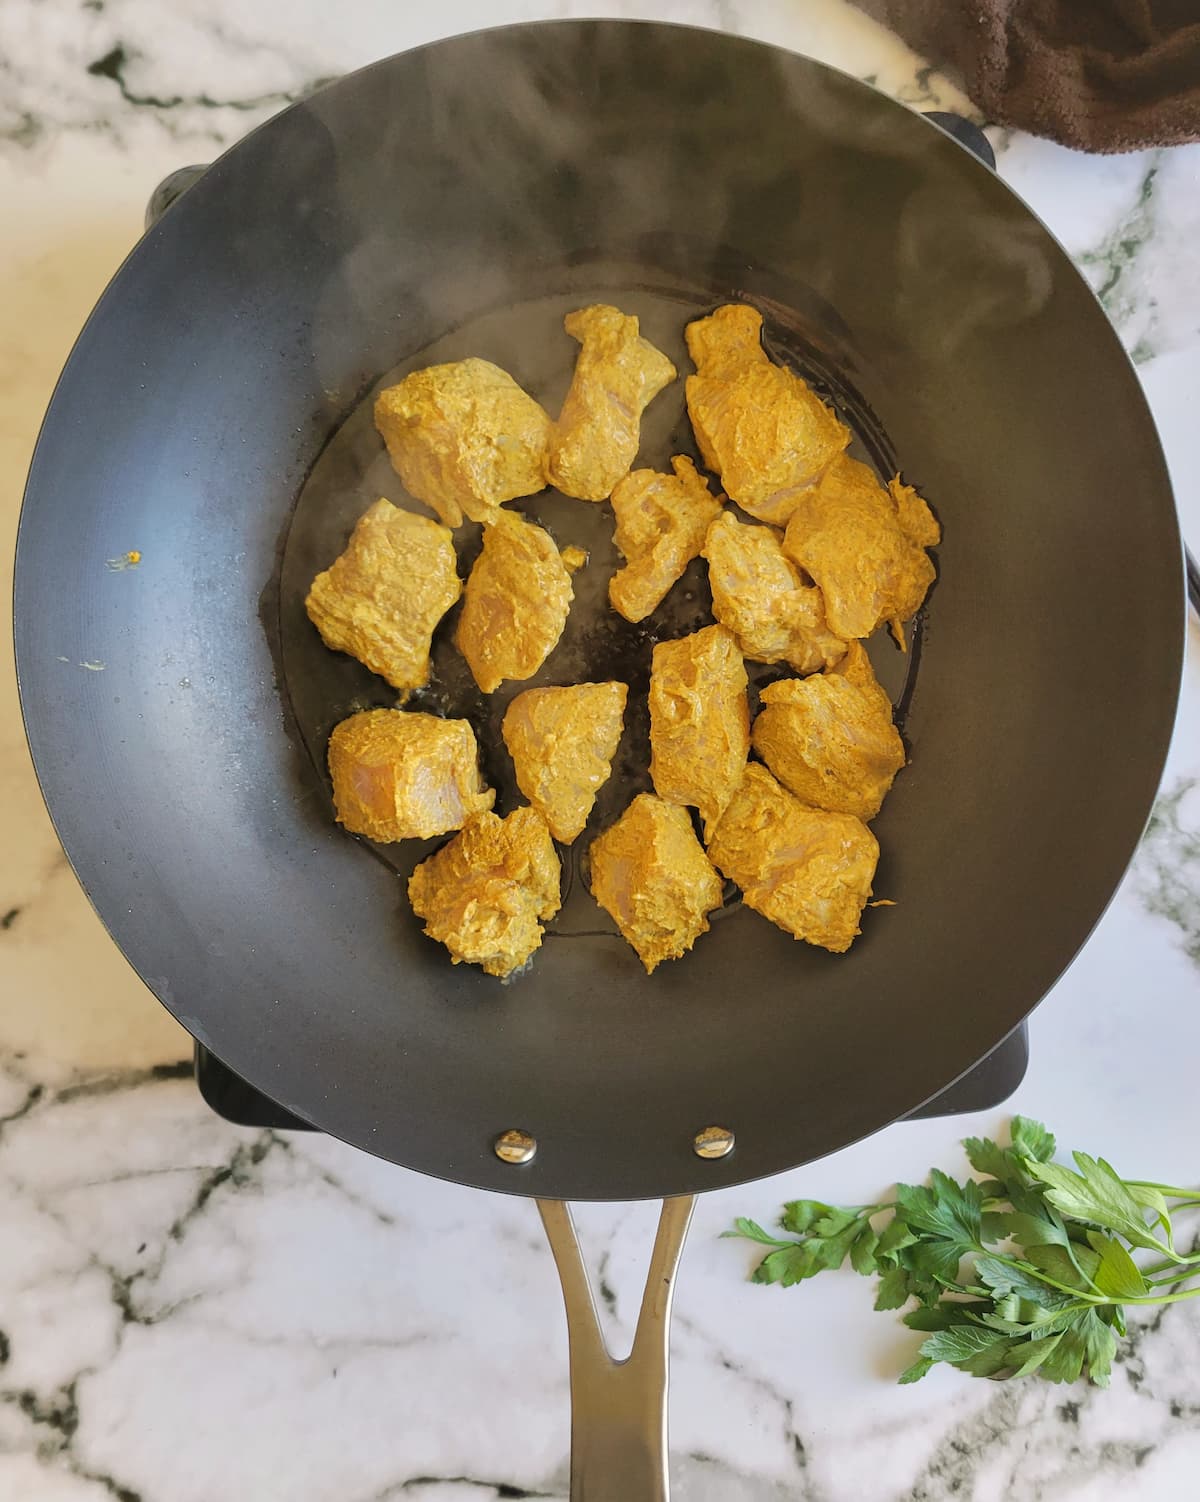 yellow seasoned chicken cubes steaming in a pan on a burner